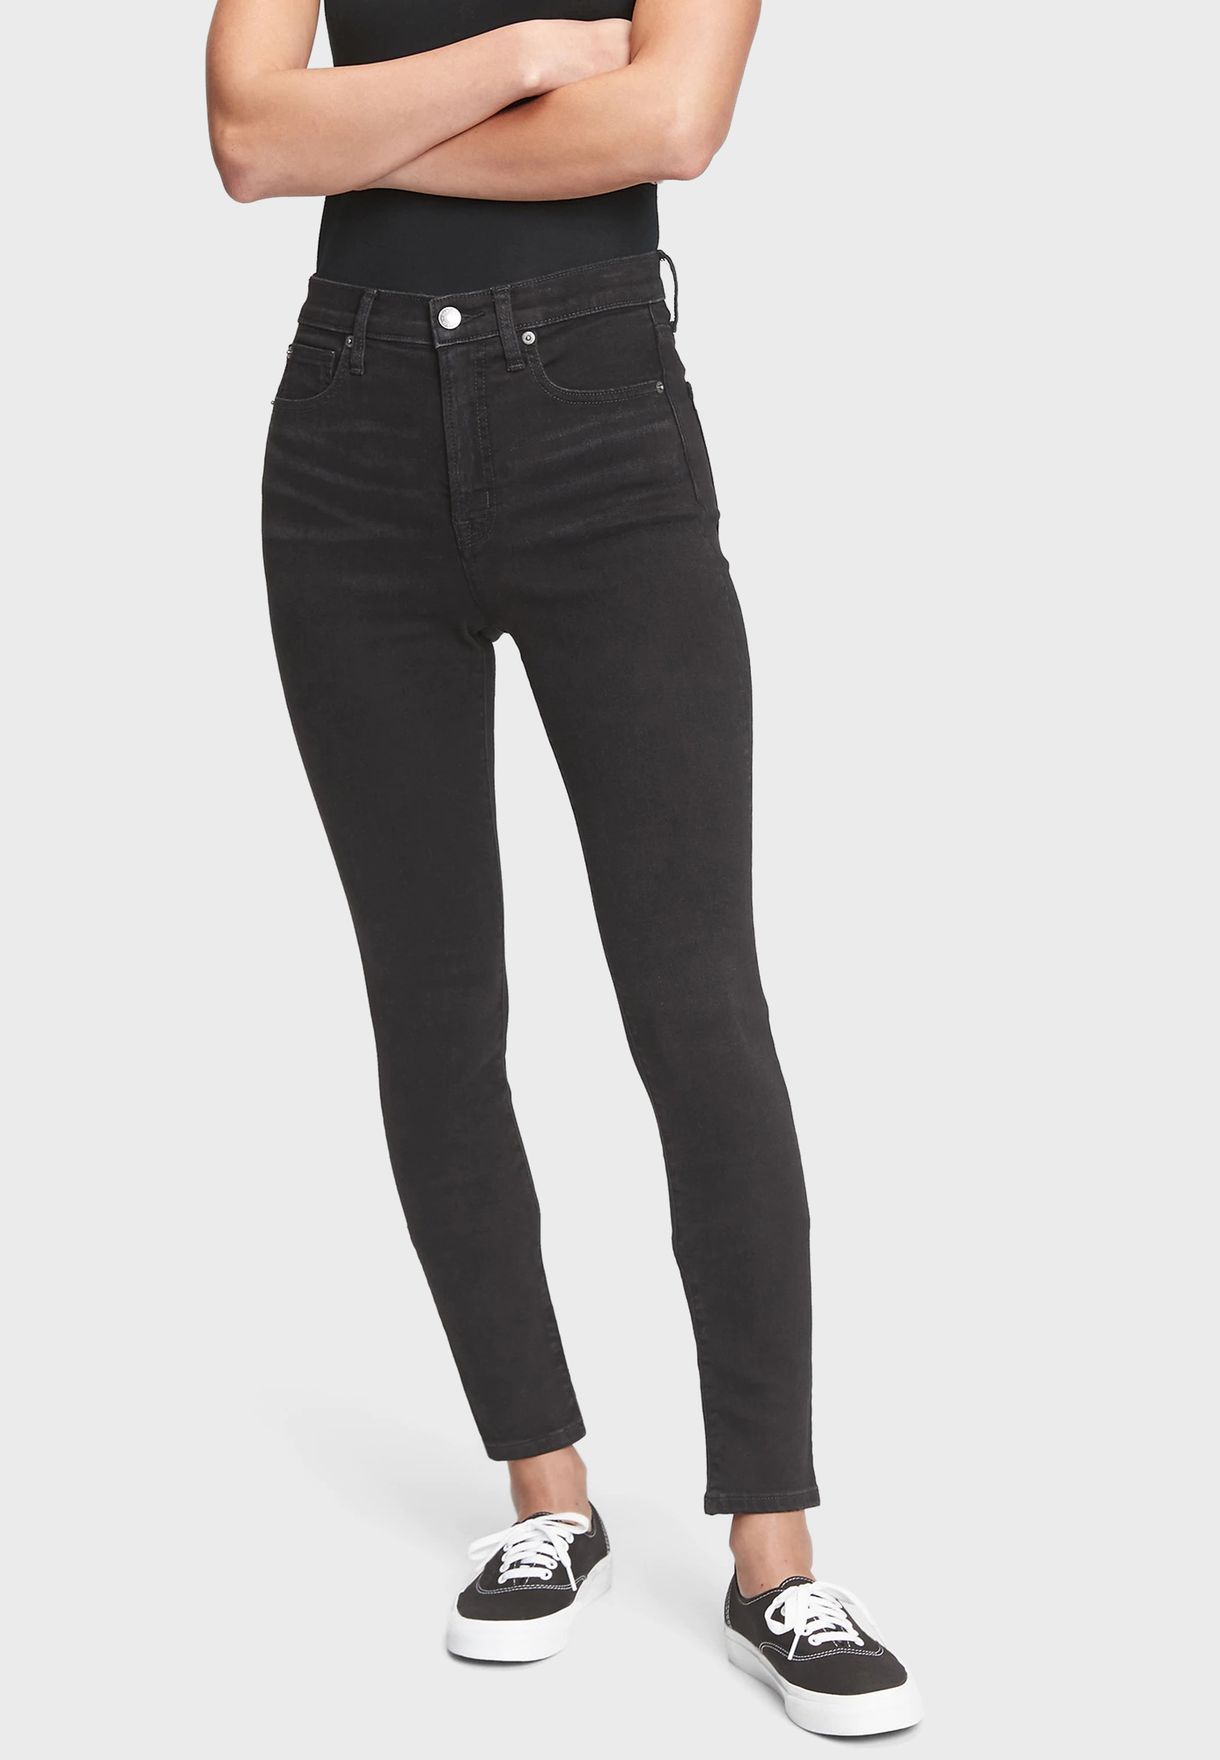 Buy > gap black high waisted jeans > in stock